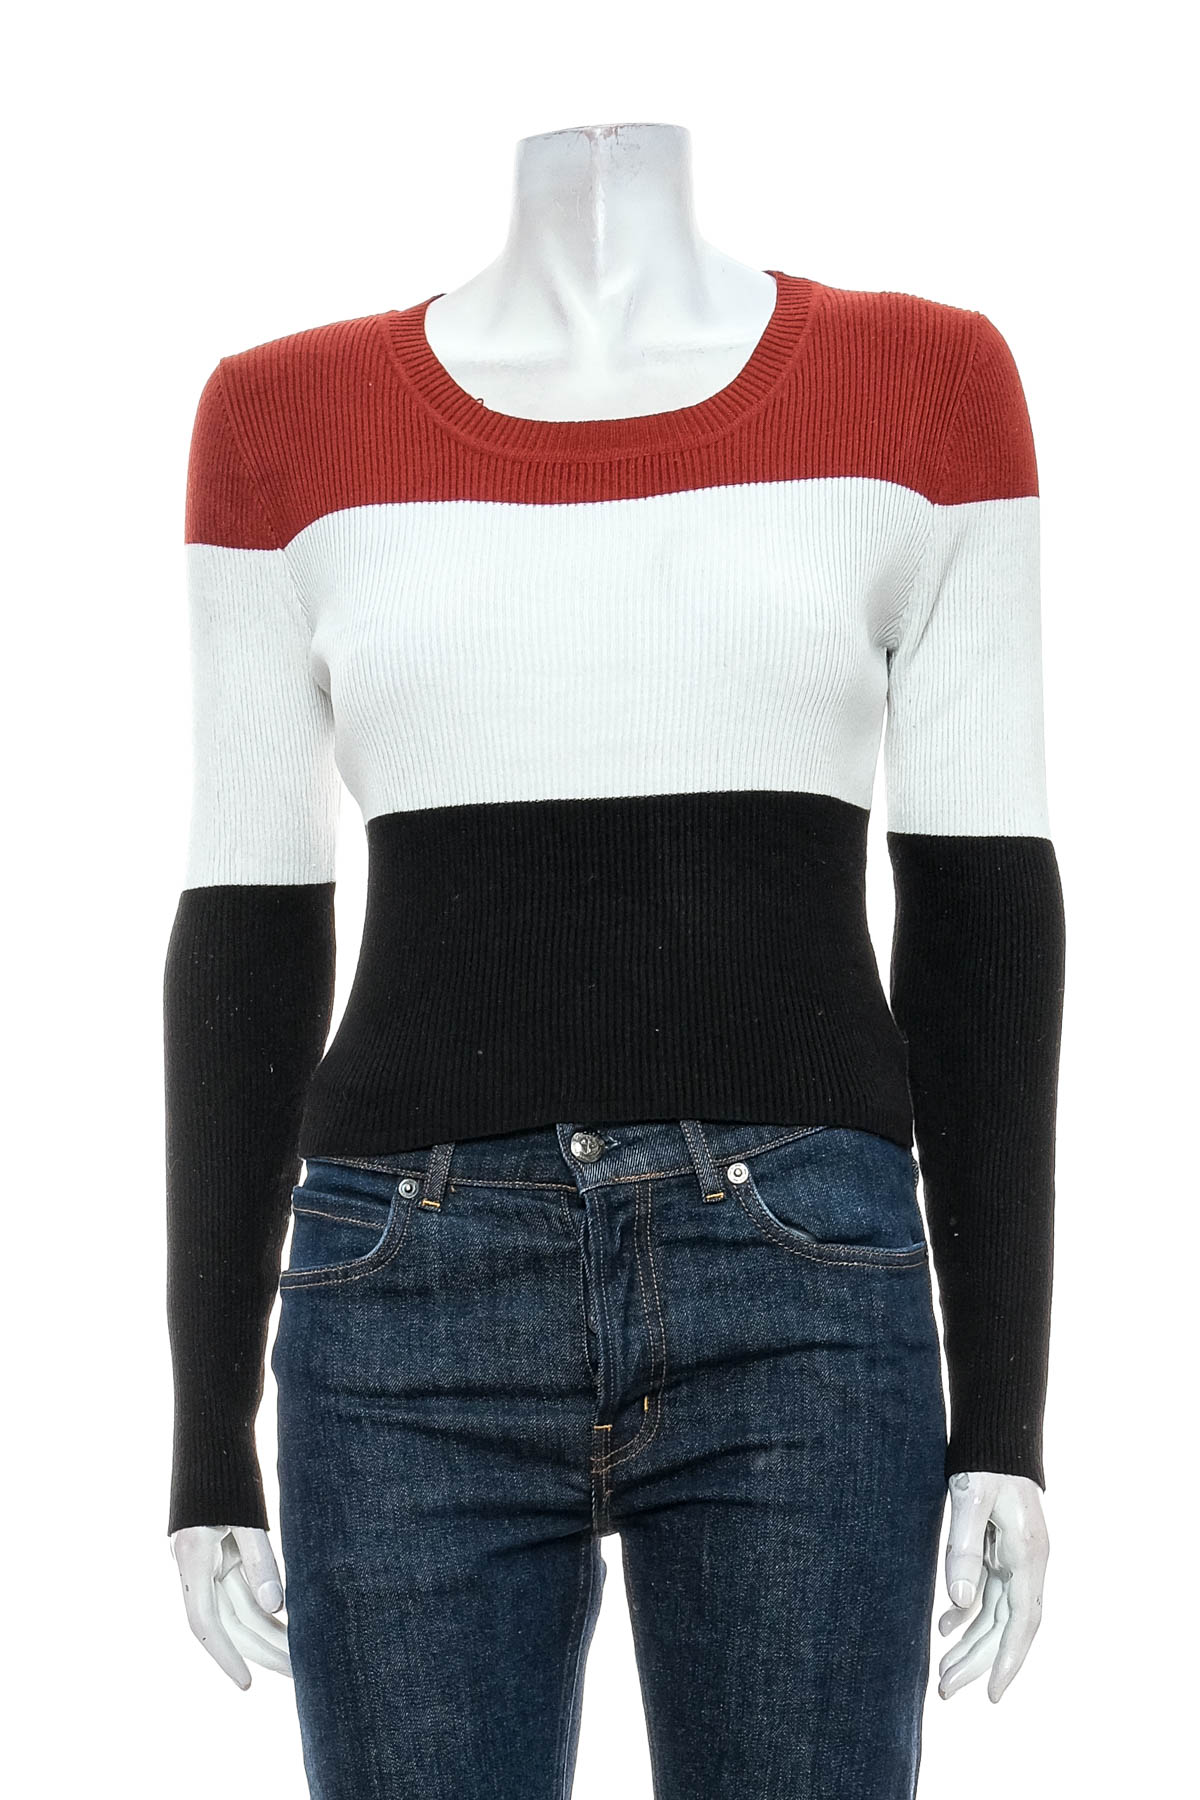 Women's sweater - The Slope - 0